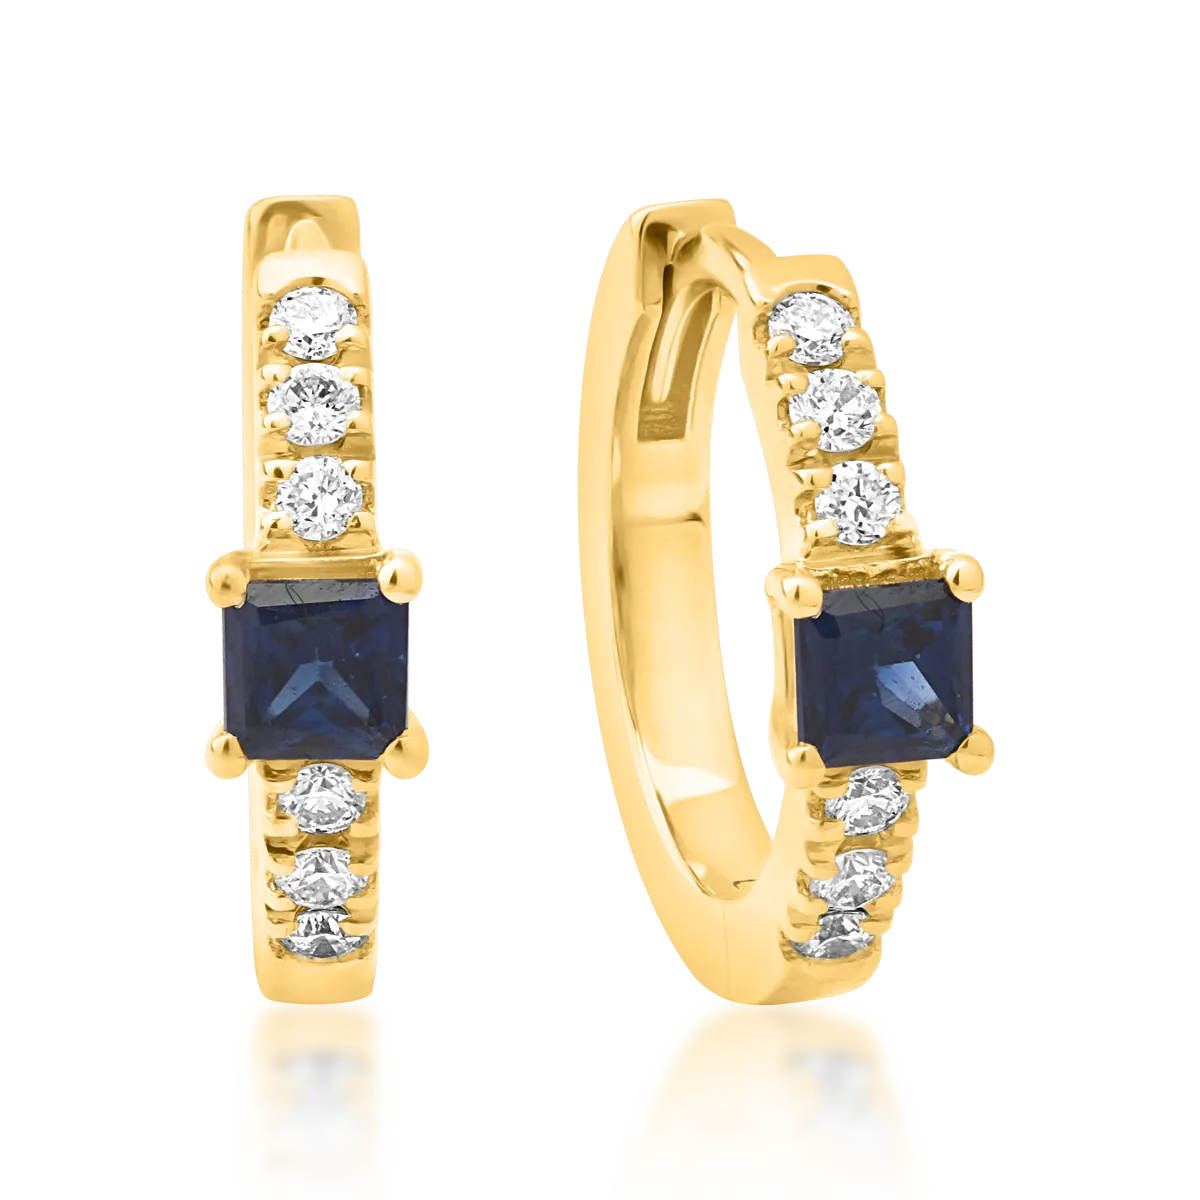 18K yellow gold earrings with 0.15ct sapphires and 0.06ct diamonds